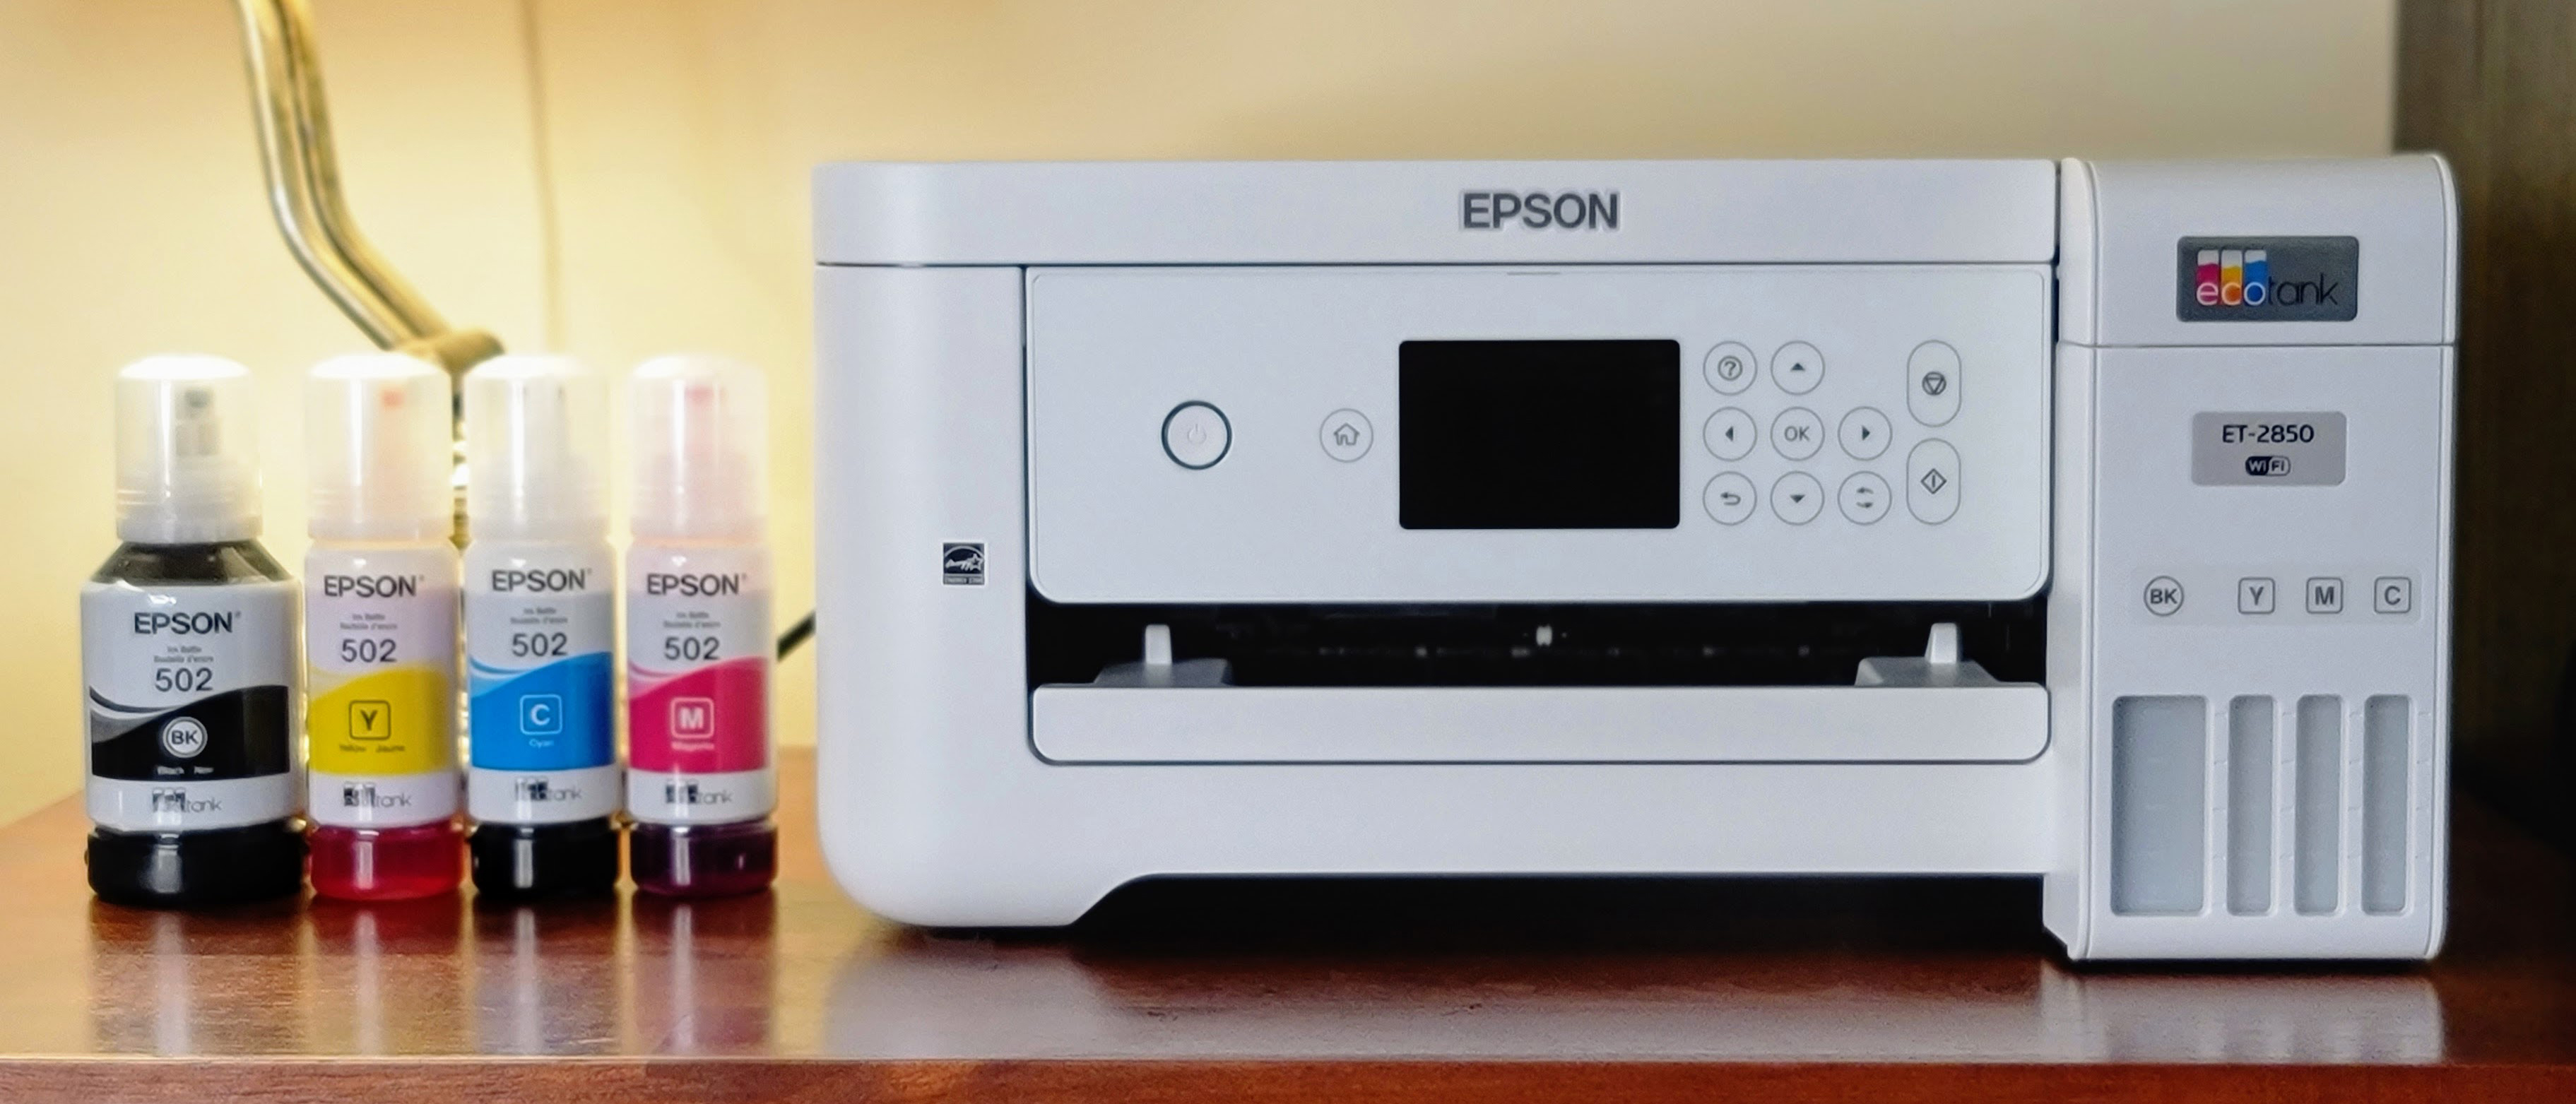 Canon Pixma G3270 vs Epson EcoTank ET-2850: What is the difference?